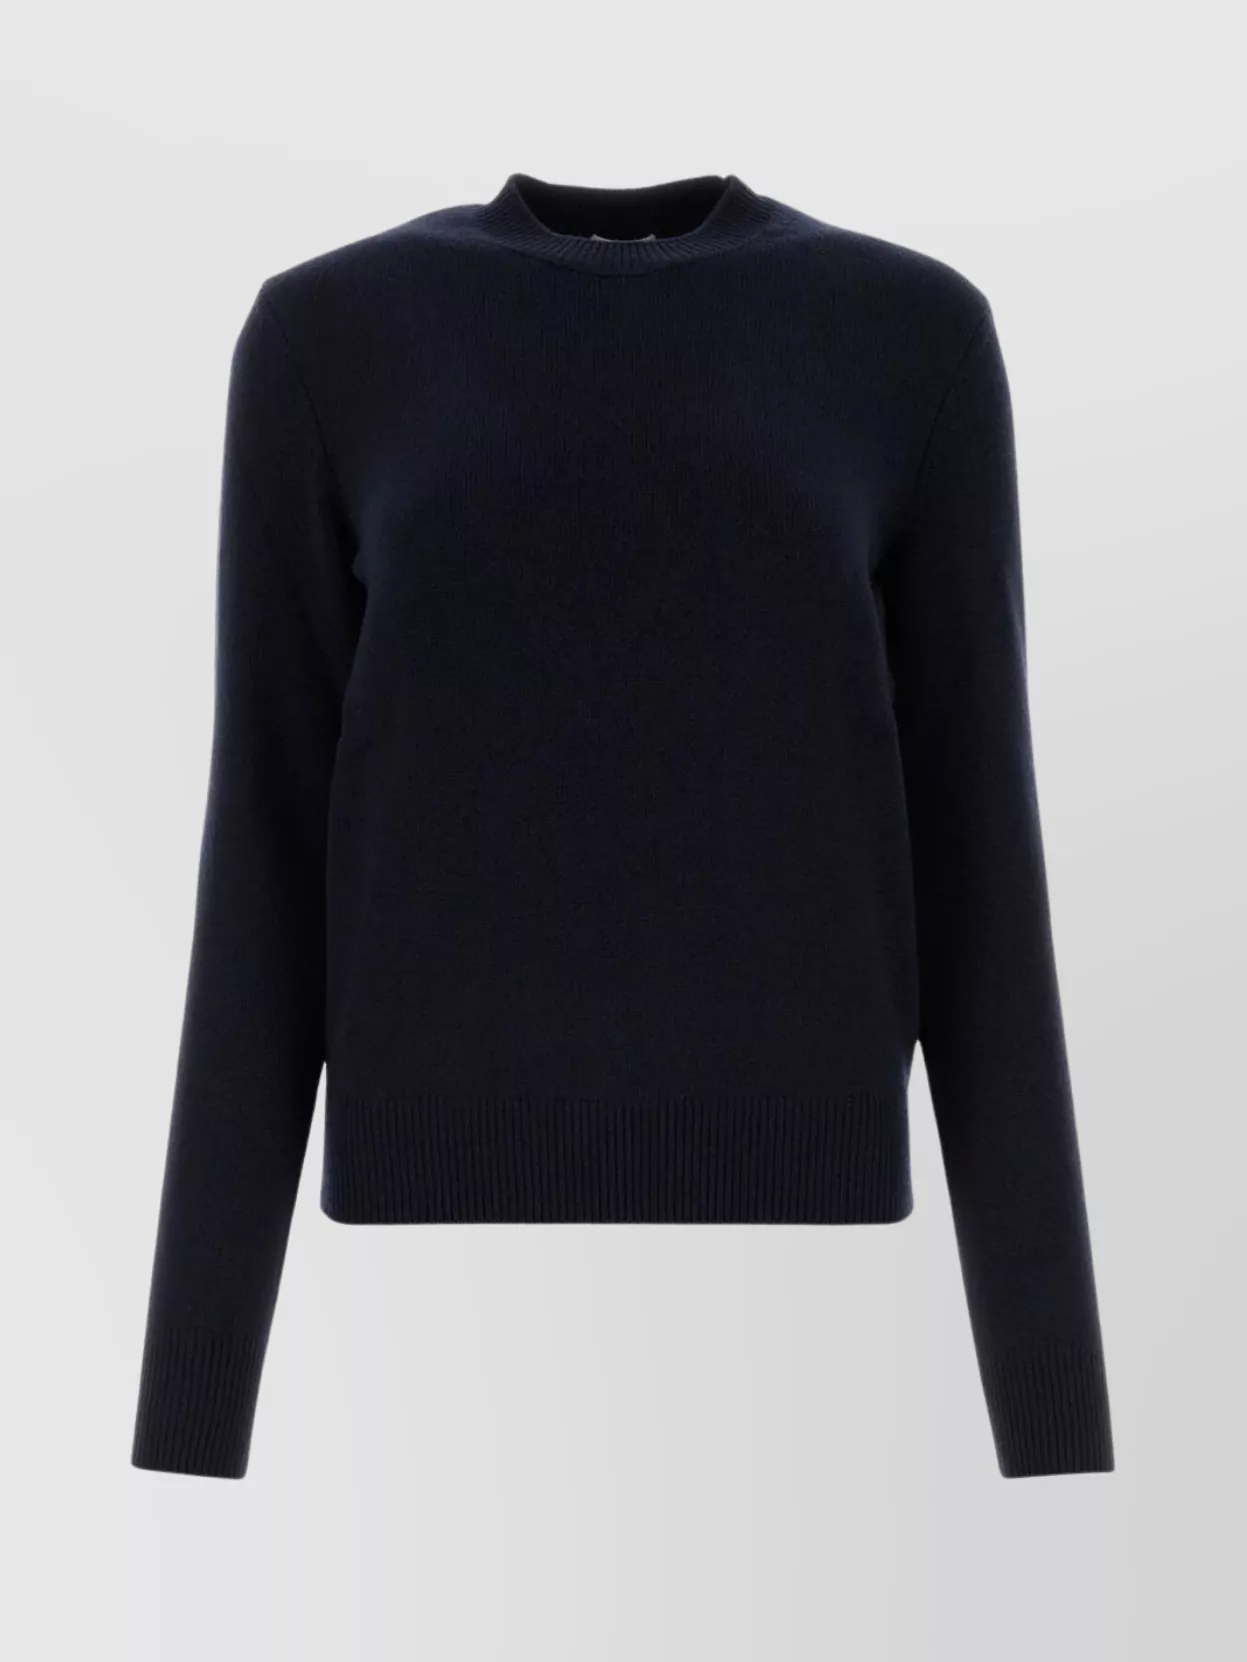 Shop Bottega Veneta Relaxed Fit Cashmere Blend Sweater With Leather Patches